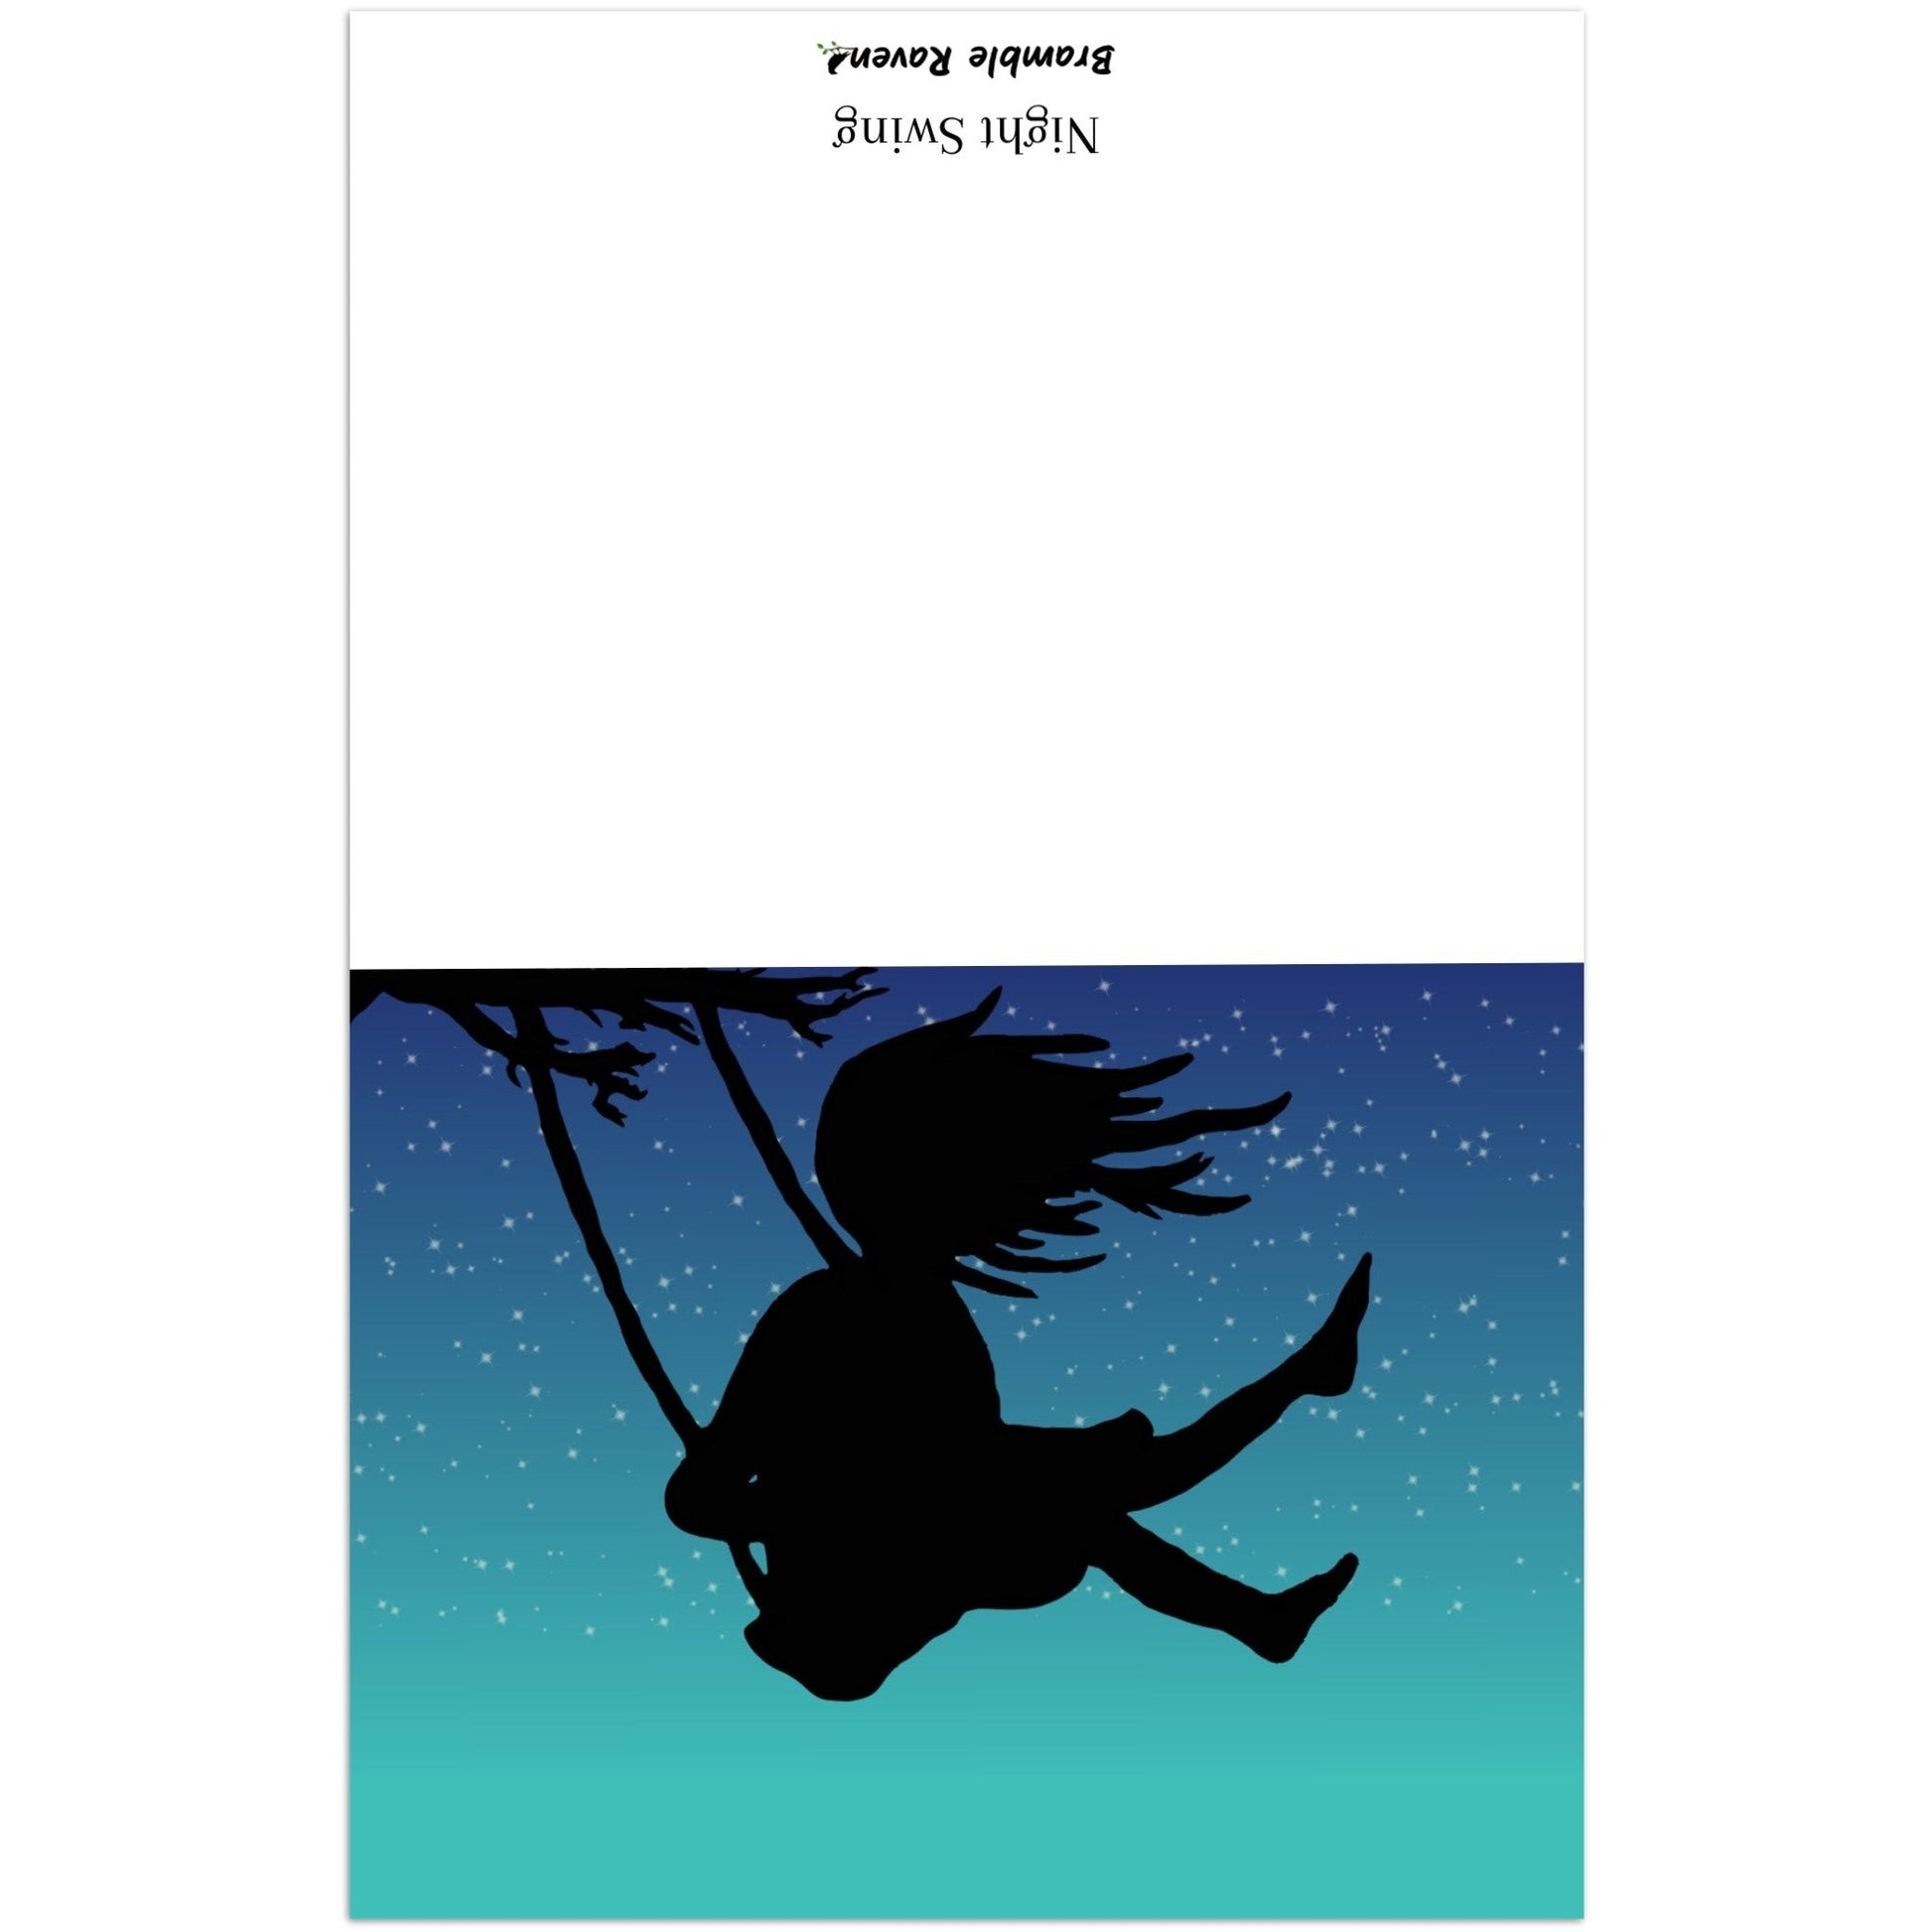 Pack of ten 4.25 by 5.5 inch Night Swing greeting cards and envelopes. Front shows silhouette of a girl in a tree swing against a starry summer night sky. Inside is blank. 